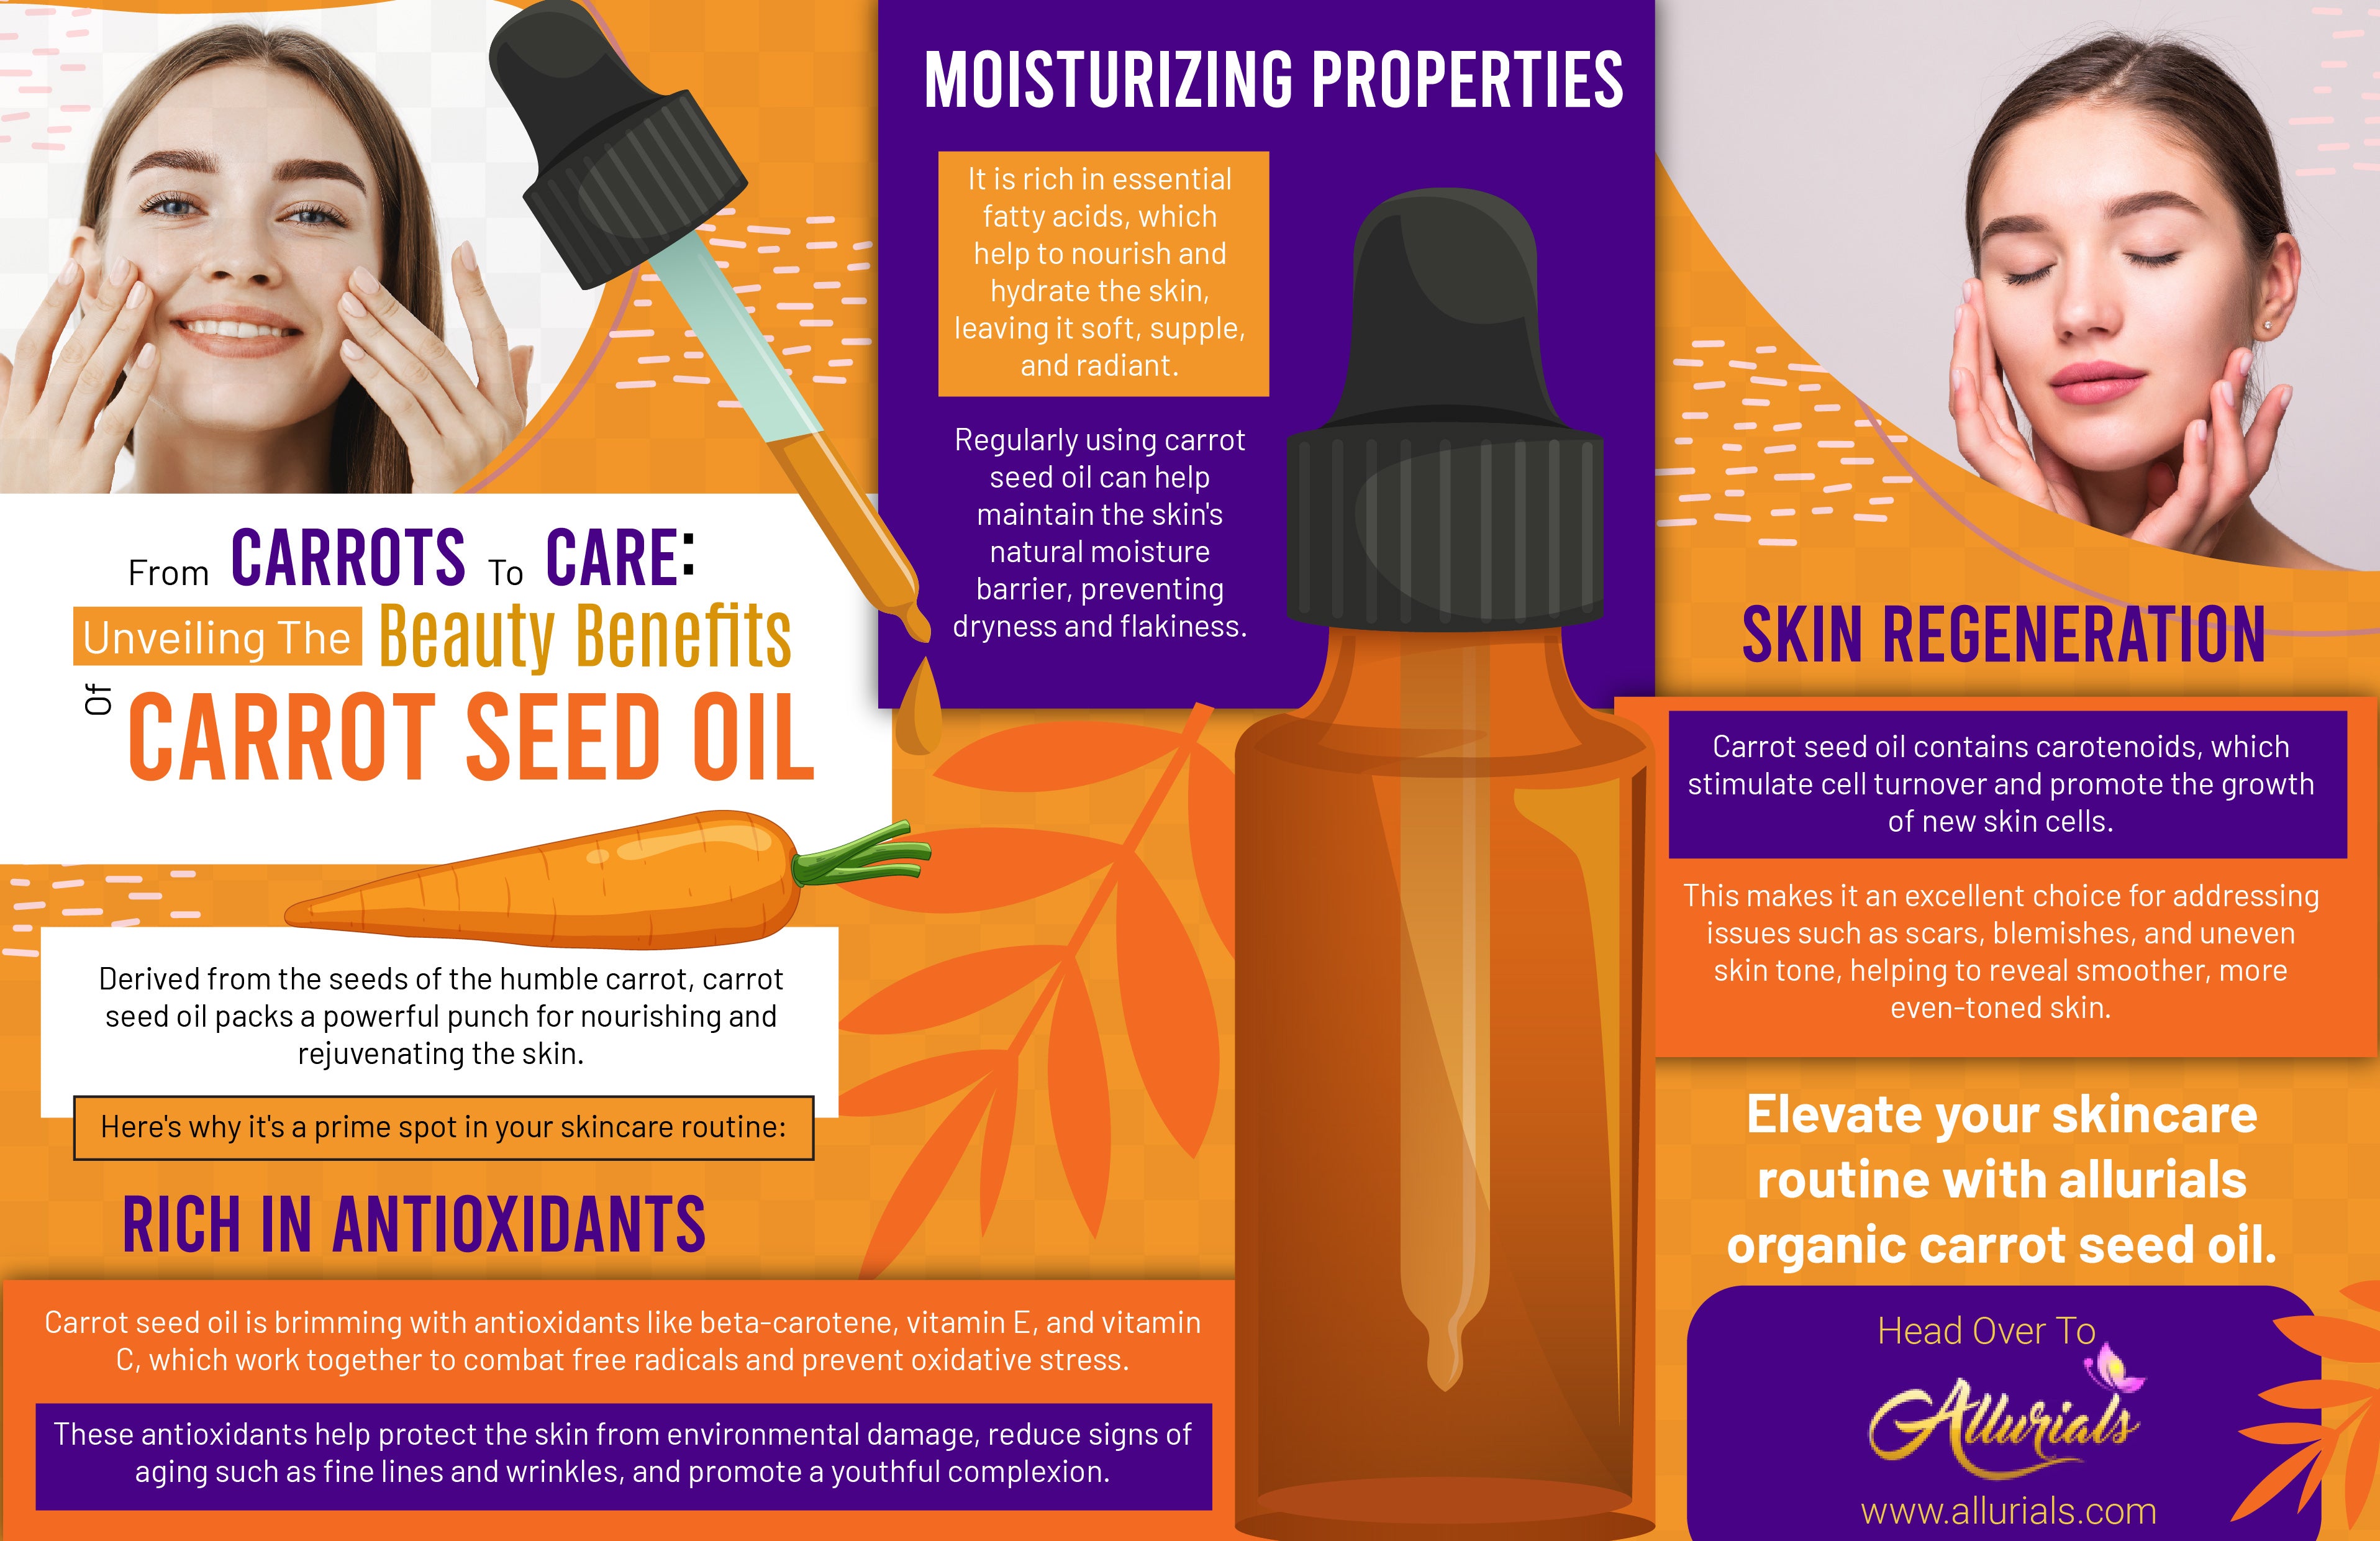 From CARROTS To CARE: Unveiling The Beauty Benefits Of CARROT SEED OIL